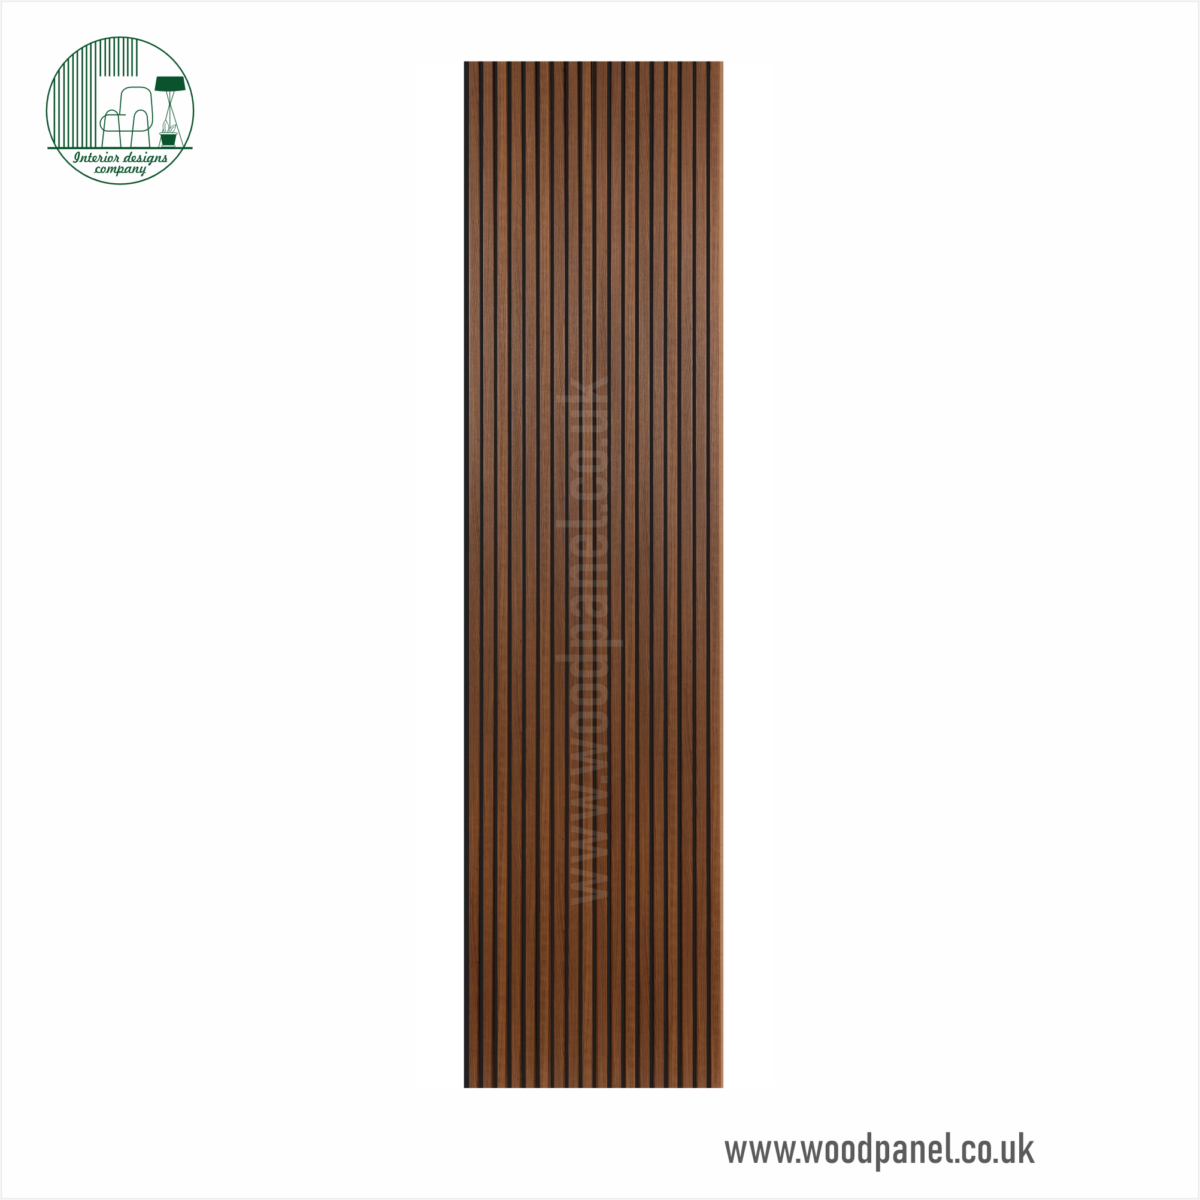 H3734 BLK 120 01 Purity Panel H3734 Natural Dijon Walnut with Black Strip ST120